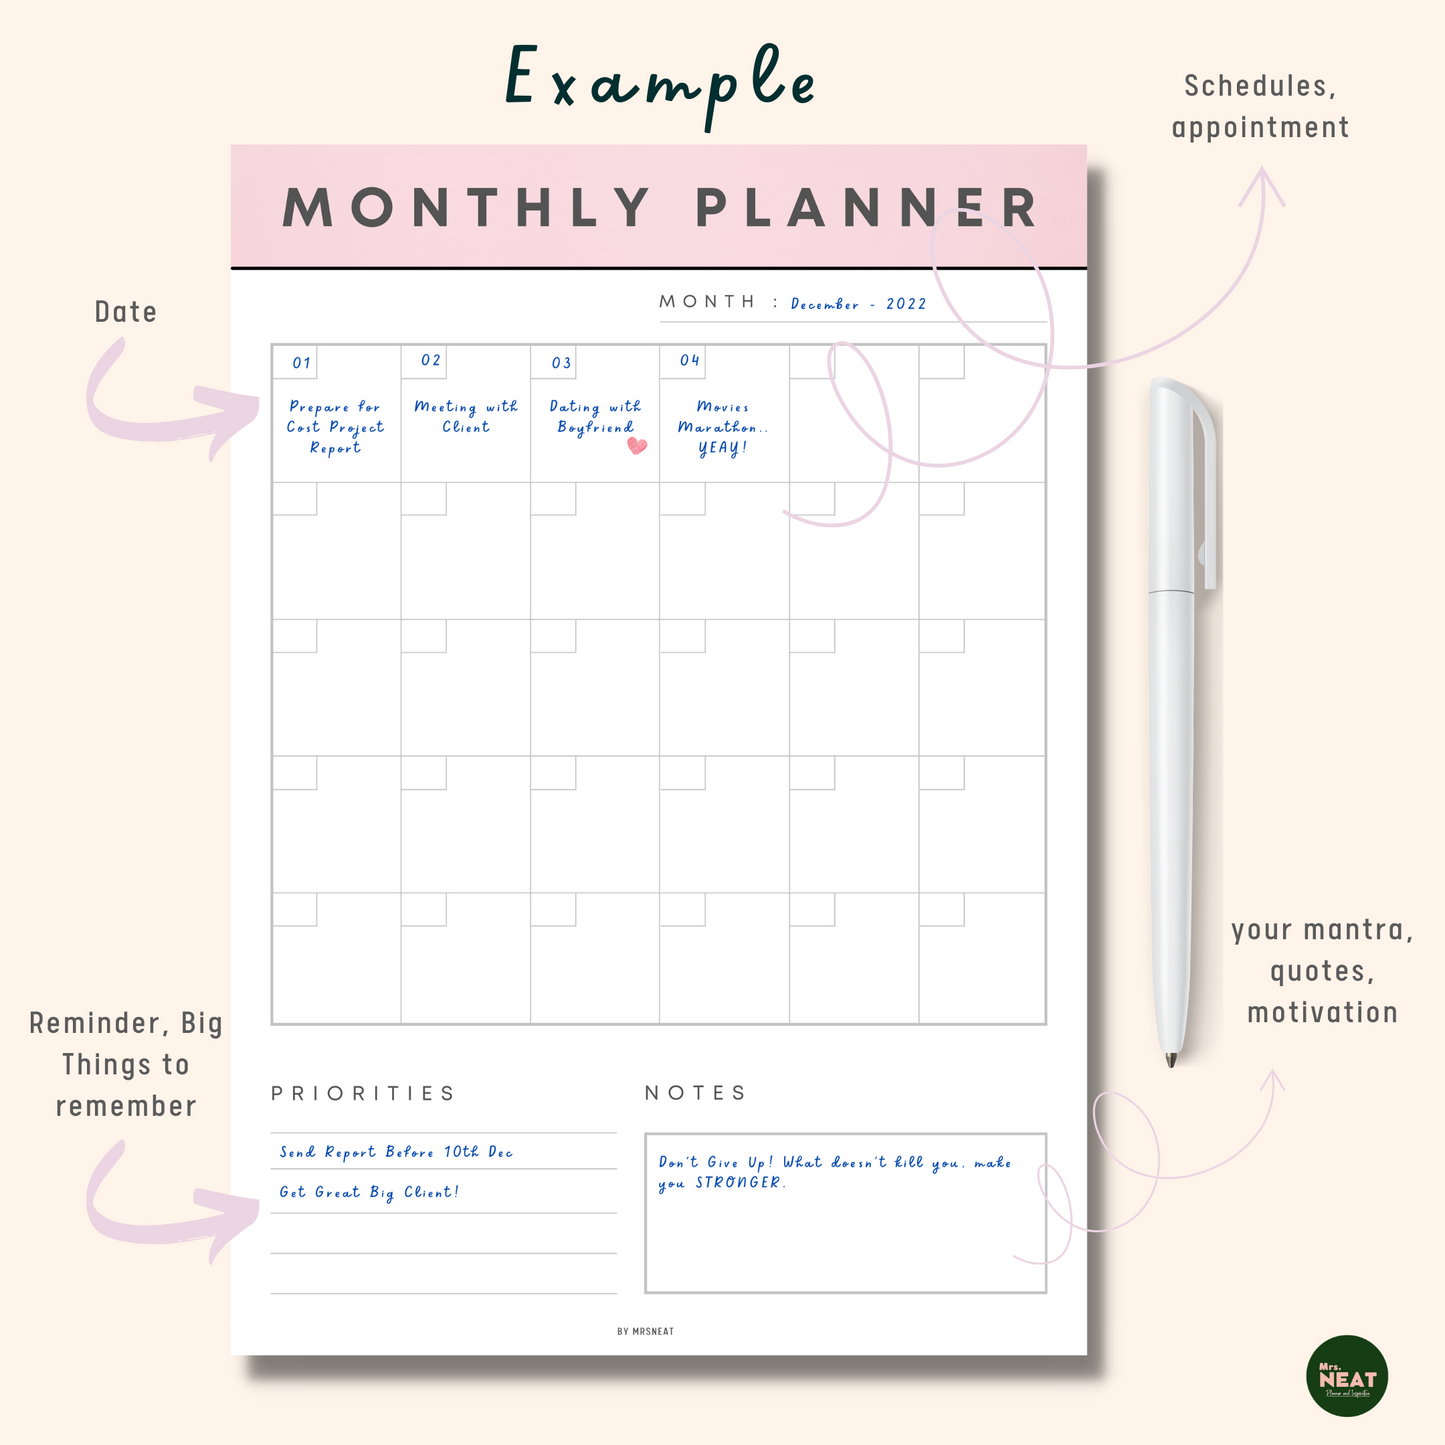 Adorable Pink Monthly Planner in Minimalist design with dated and schedules as an example